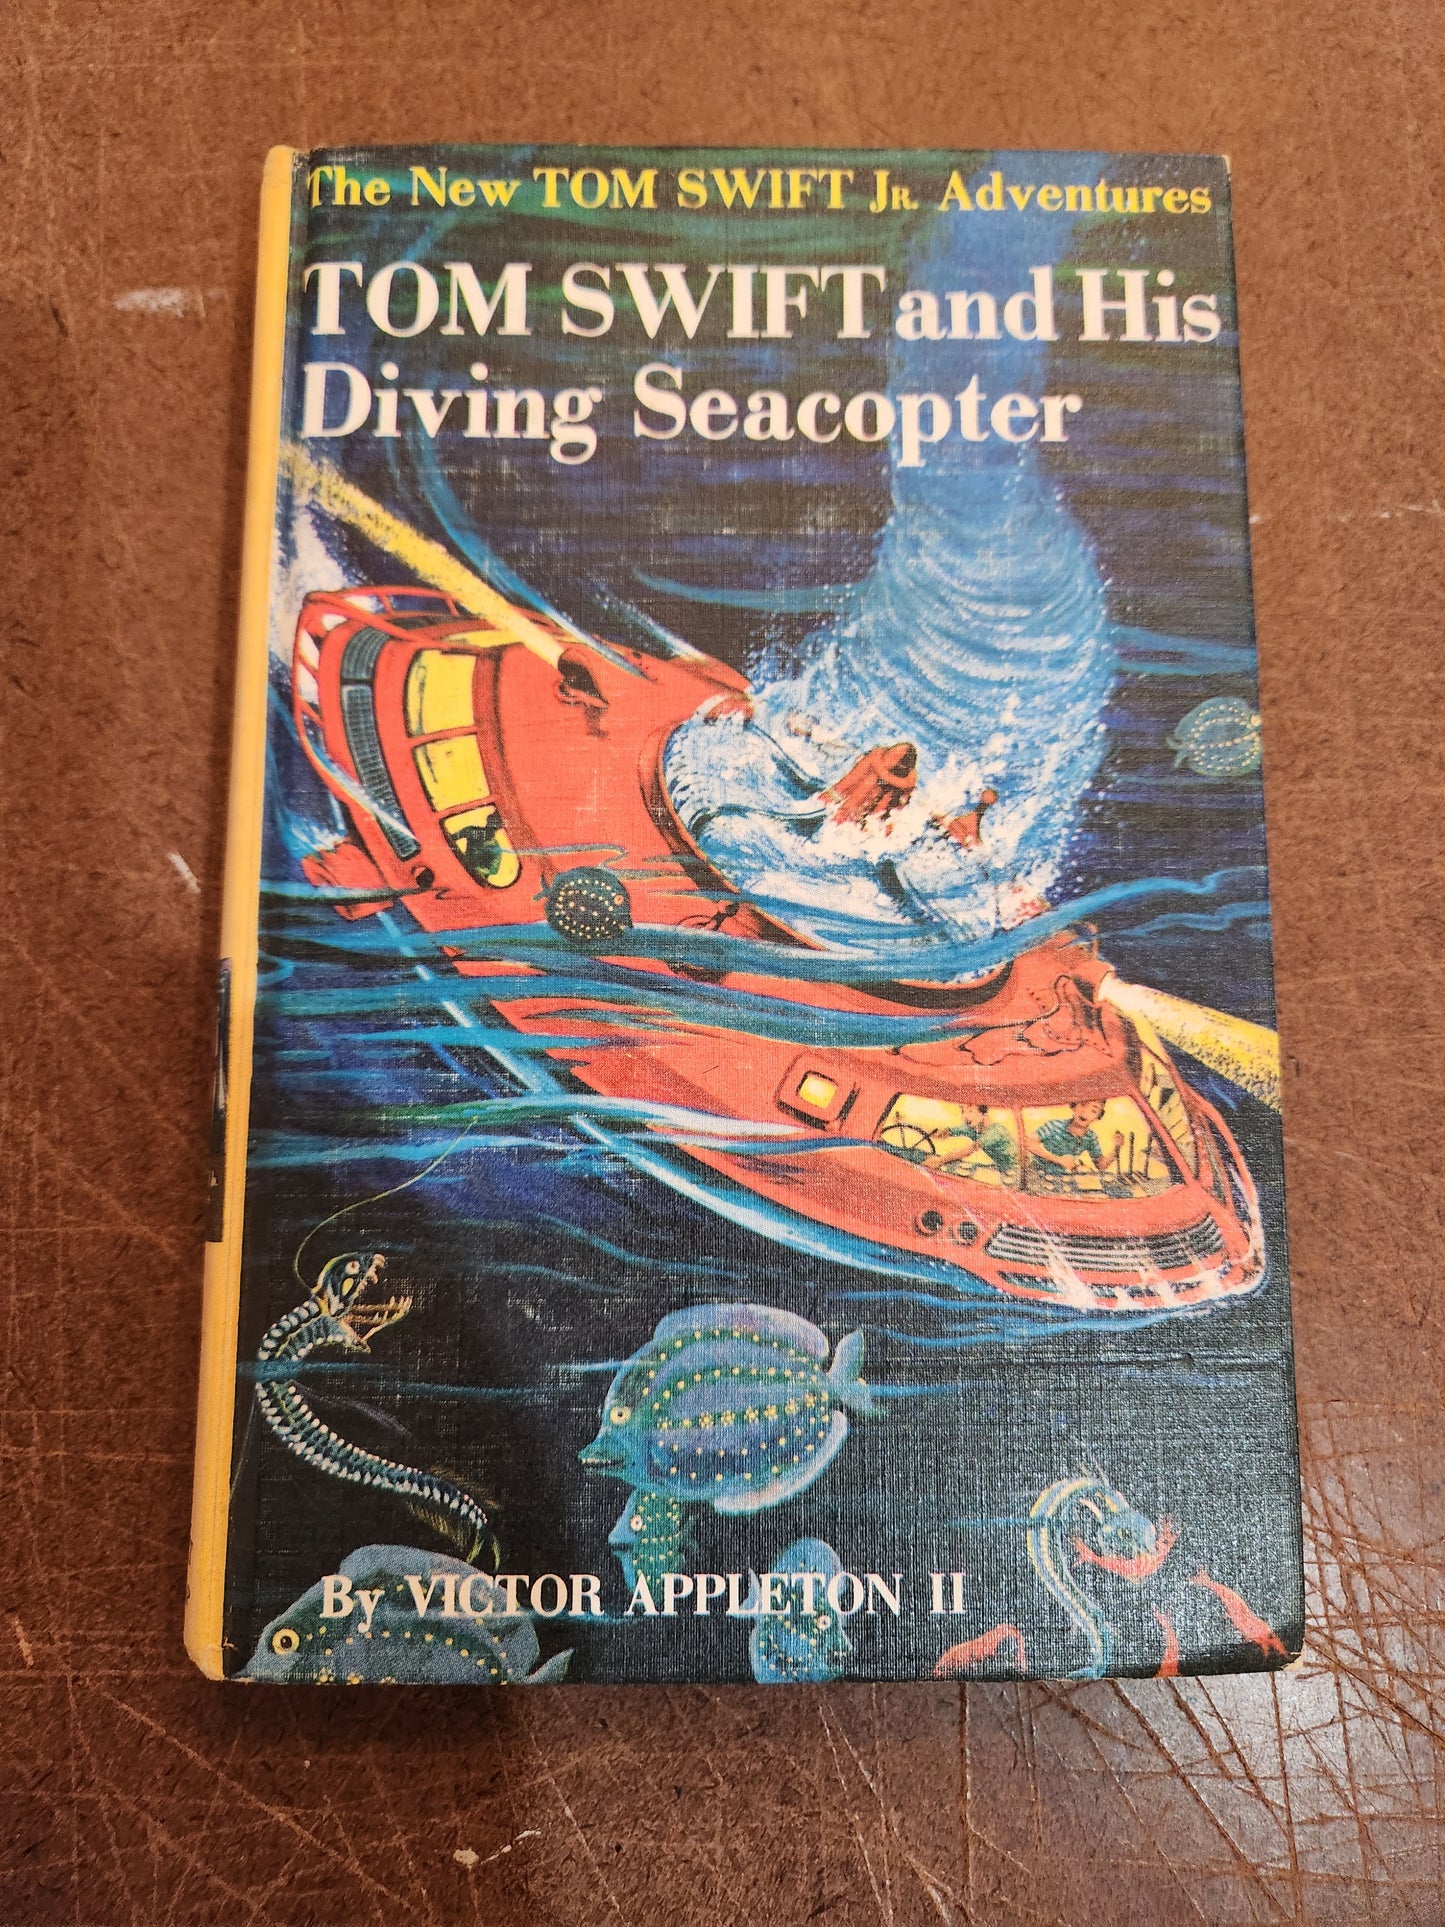 "Tom Swift and His Diving Seacopter" by Victor Appleton II, (Yellow Spine)